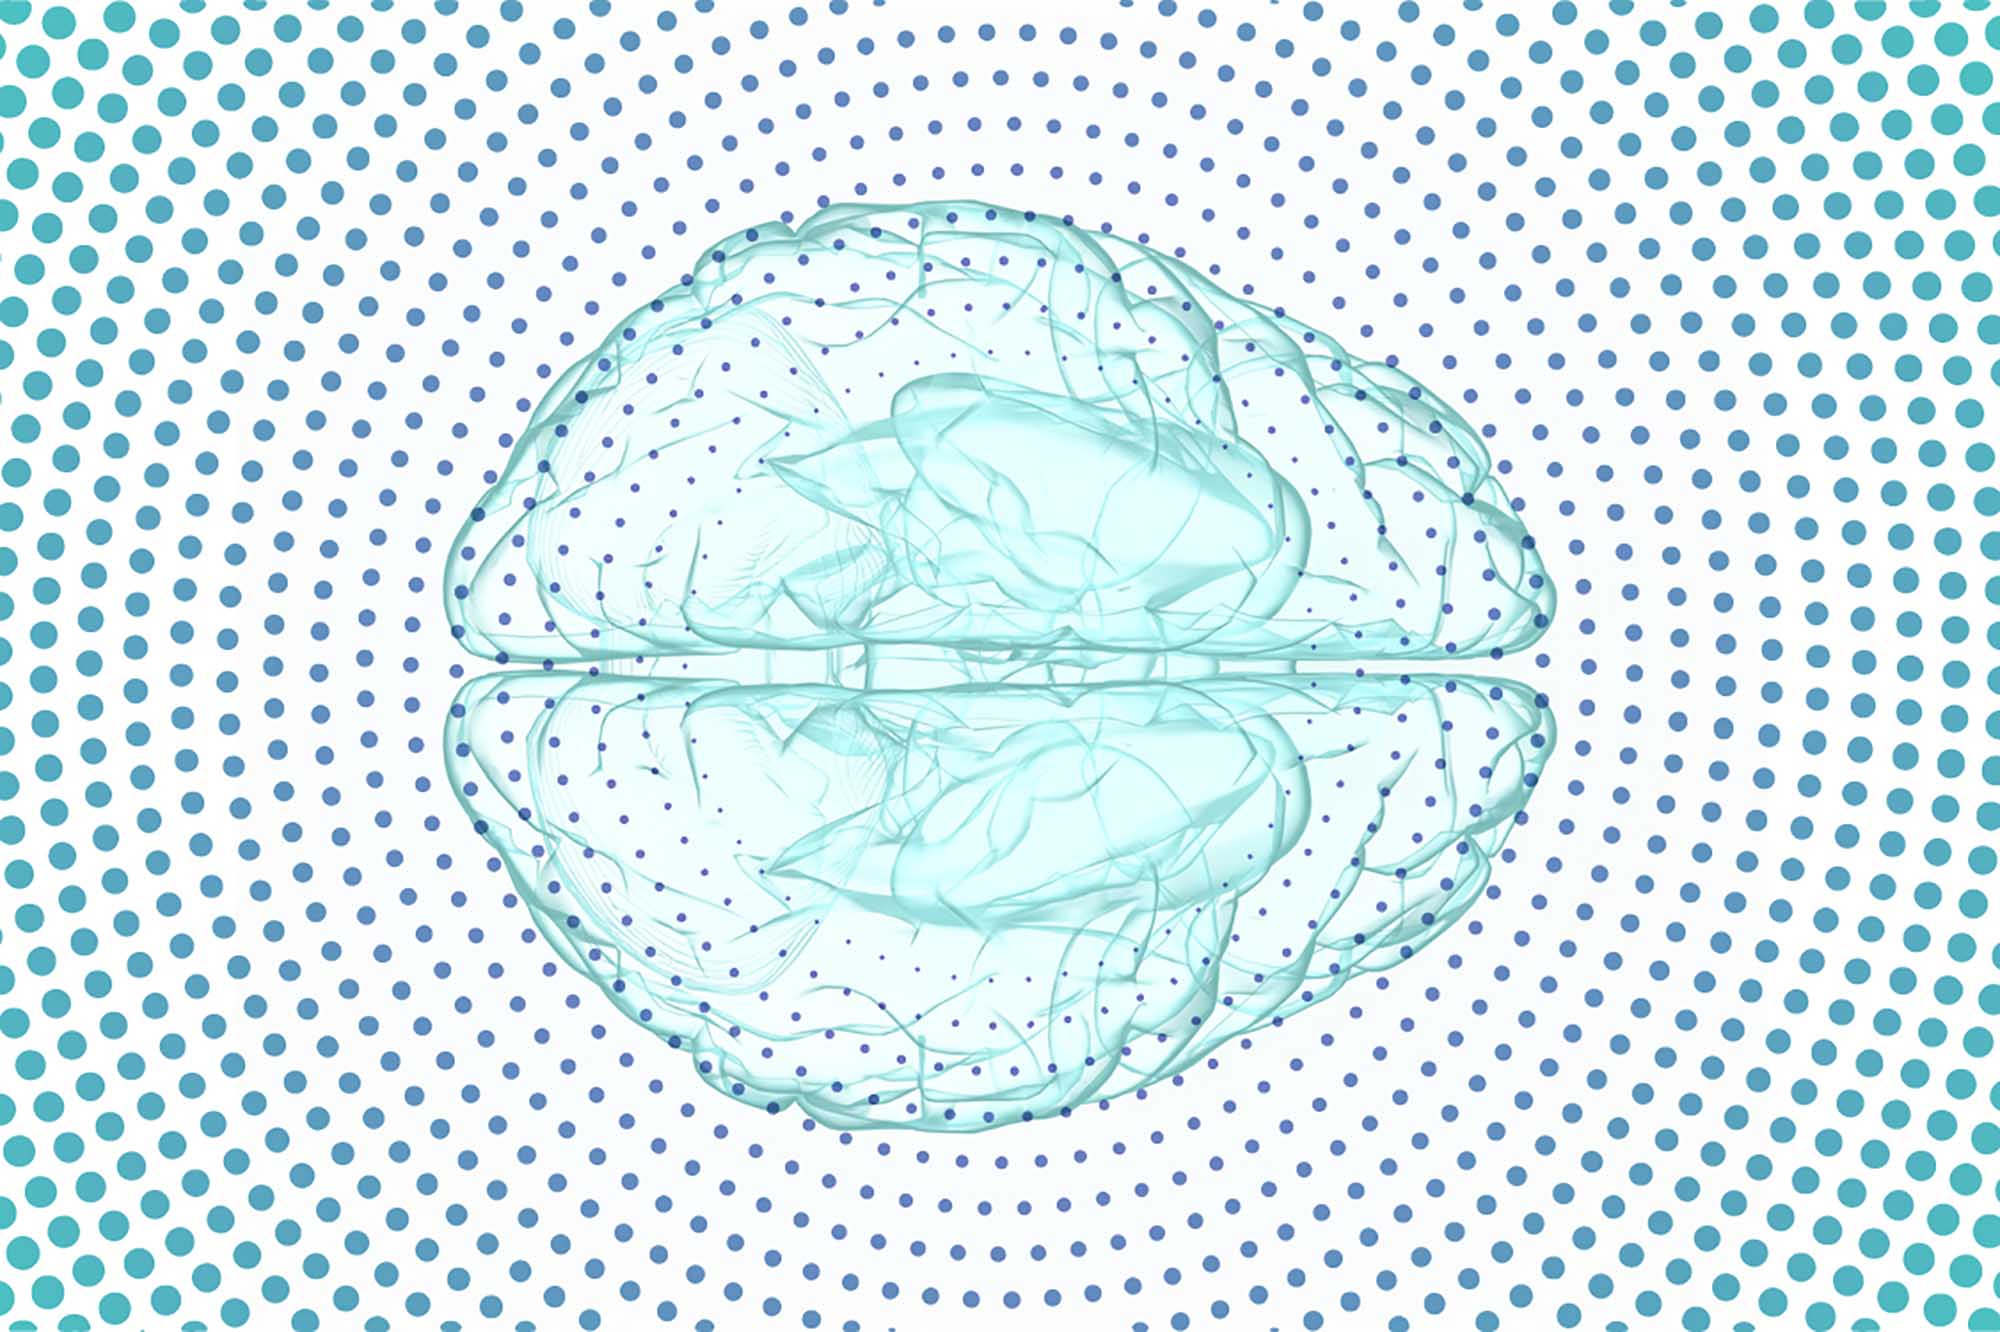 Illustration of brain on a background of dots that are small in the middle and get bigger as it gets closer to the edge of the image